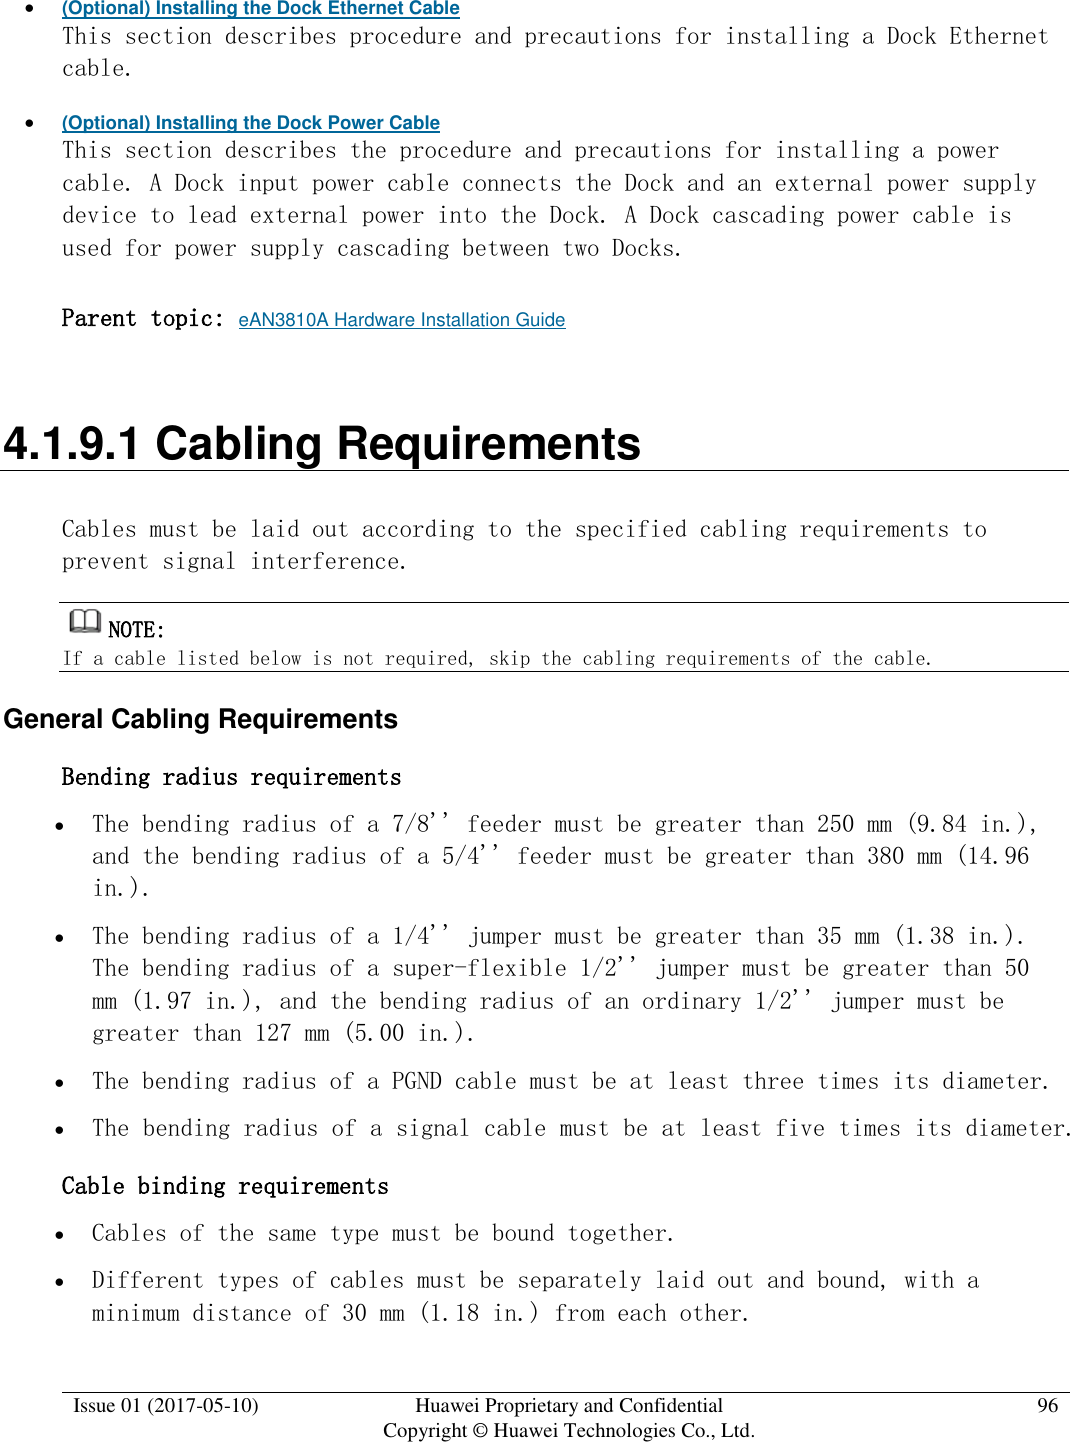  Issue 01 (2017-05-10) Huawei Proprietary and Confidential      Copyright © Huawei Technologies Co., Ltd. 96   (Optional) Installing the Dock Ethernet Cable This section describes procedure and precautions for installing a Dock Ethernet cable.  (Optional) Installing the Dock Power Cable This section describes the procedure and precautions for installing a power cable. A Dock input power cable connects the Dock and an external power supply device to lead external power into the Dock. A Dock cascading power cable is used for power supply cascading between two Docks.  Parent topic: eAN3810A Hardware Installation Guide 4.1.9.1 Cabling Requirements Cables must be laid out according to the specified cabling requirements to prevent signal interference. NOTE:  If a cable listed below is not required, skip the cabling requirements of the cable. General Cabling Requirements Bending radius requirements  The bending radius of a 7/8&apos;&apos; feeder must be greater than 250 mm (9.84 in.), and the bending radius of a 5/4&apos;&apos; feeder must be greater than 380 mm (14.96 in.).  The bending radius of a 1/4&apos;&apos; jumper must be greater than 35 mm (1.38 in.). The bending radius of a super-flexible 1/2&apos;&apos; jumper must be greater than 50 mm (1.97 in.), and the bending radius of an ordinary 1/2&apos;&apos; jumper must be greater than 127 mm (5.00 in.).  The bending radius of a PGND cable must be at least three times its diameter.  The bending radius of a signal cable must be at least five times its diameter. Cable binding requirements  Cables of the same type must be bound together.  Different types of cables must be separately laid out and bound, with a minimum distance of 30 mm (1.18 in.) from each other. 